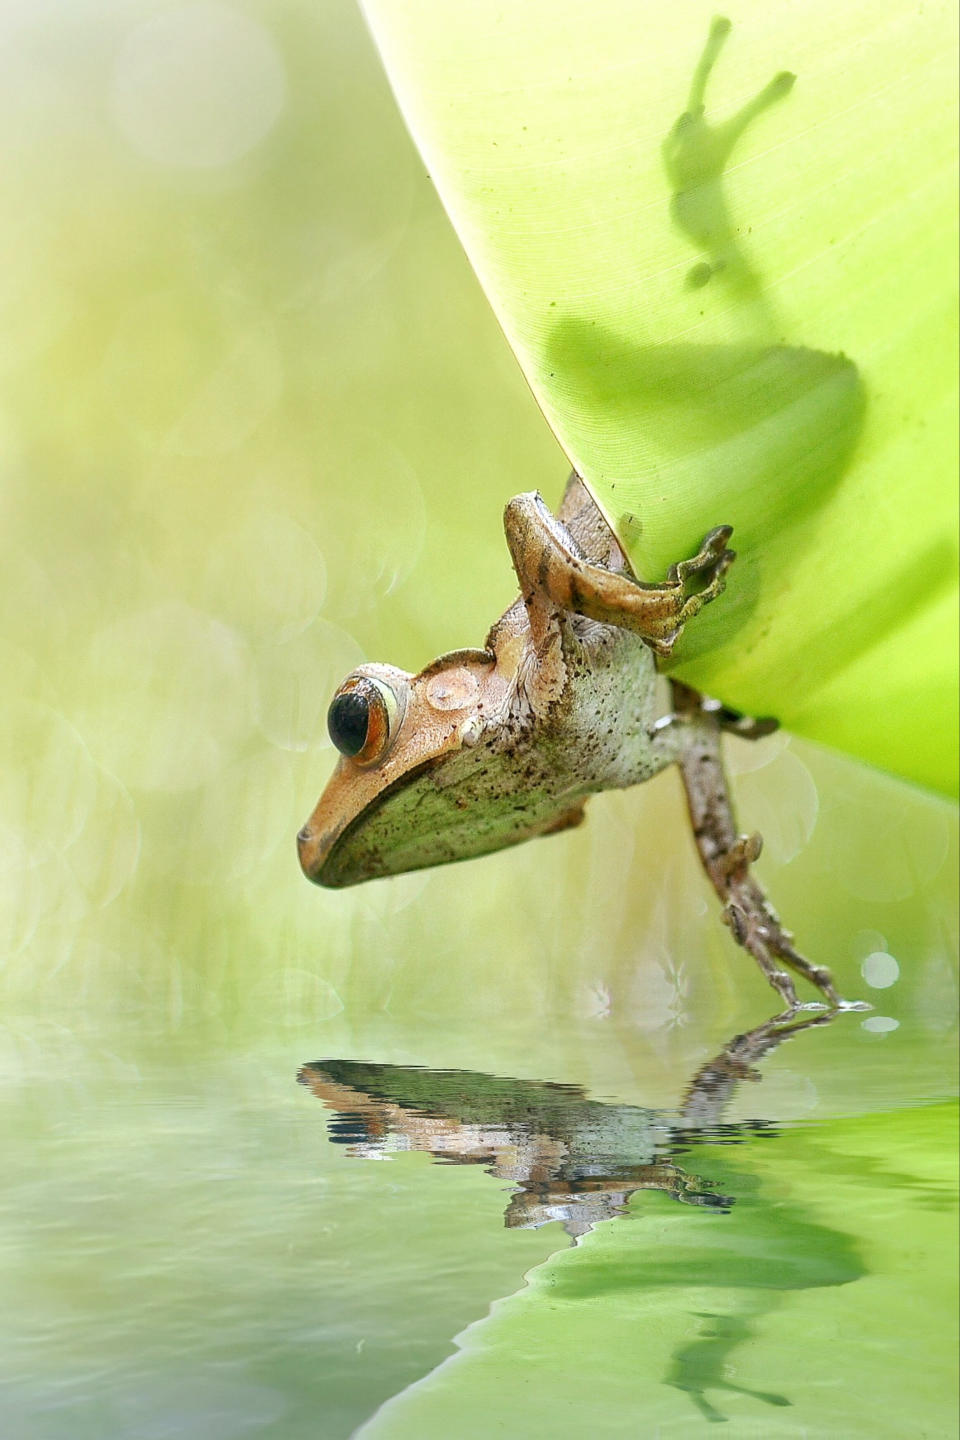 'The rain singer': A frog looks at it's reflection in the water in Semarang, Indonesia.